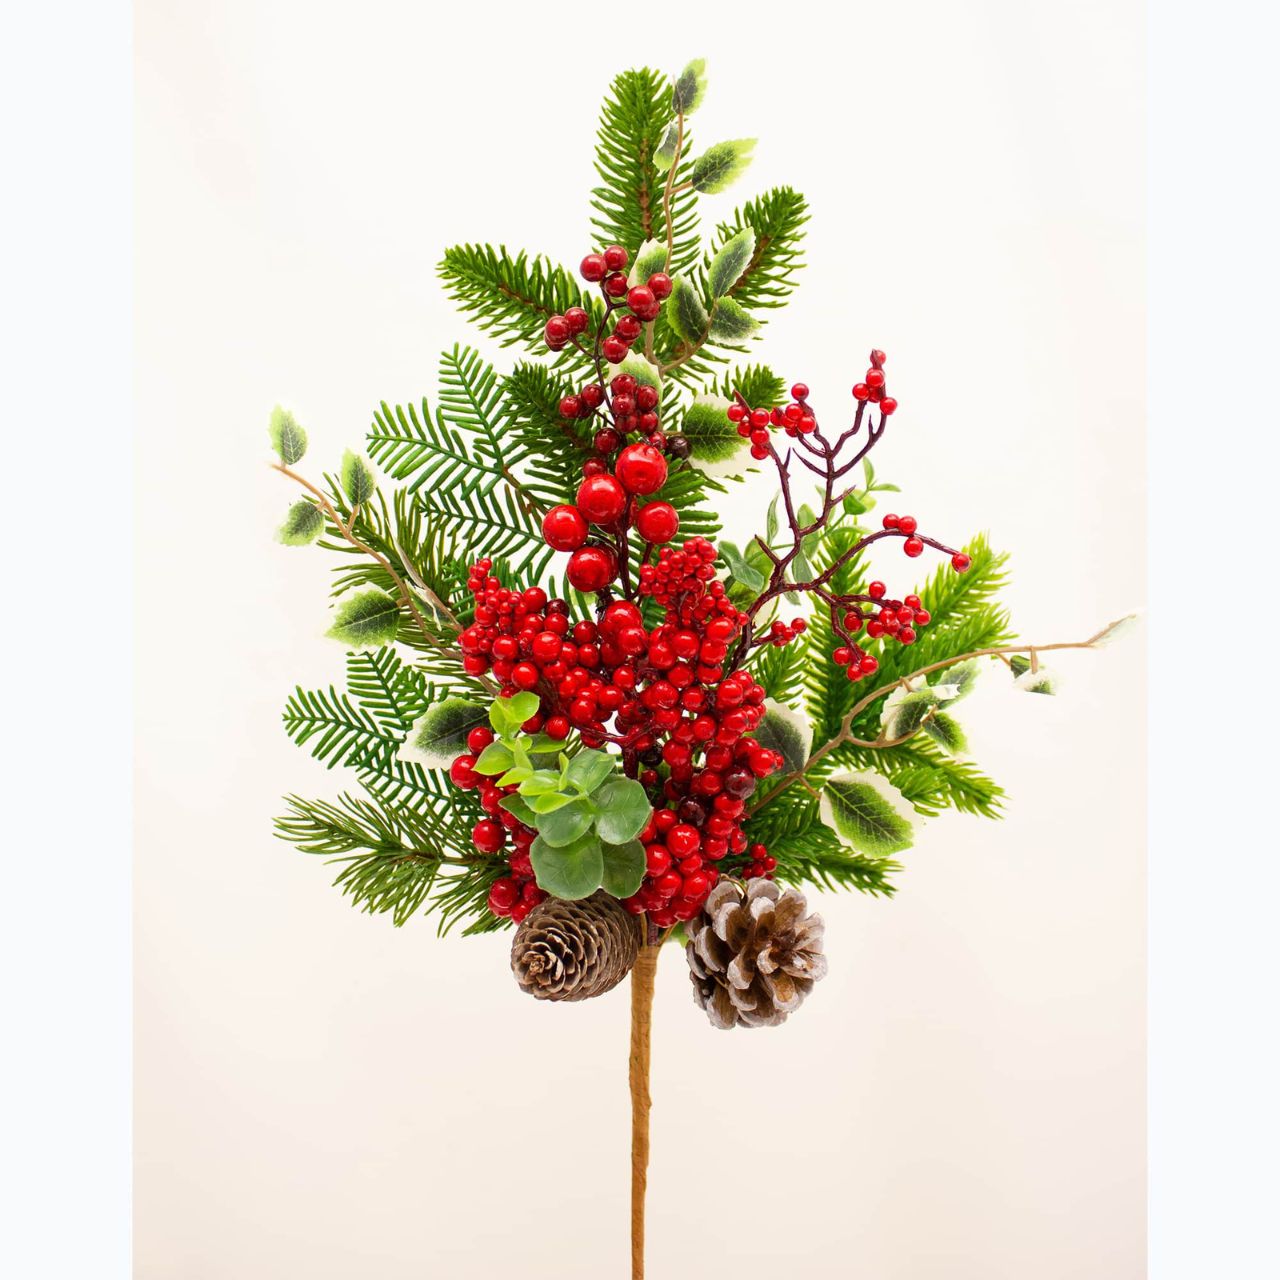 Enchante Christmas Festive Gathering Stem 56 cm  Experience the holiday season with the Enchante Christmas Festive Gathering Stem. Its vibrant colours and classic design make it perfect for any festive gathering. Enjoy the rich hues and festive flair right from your home.